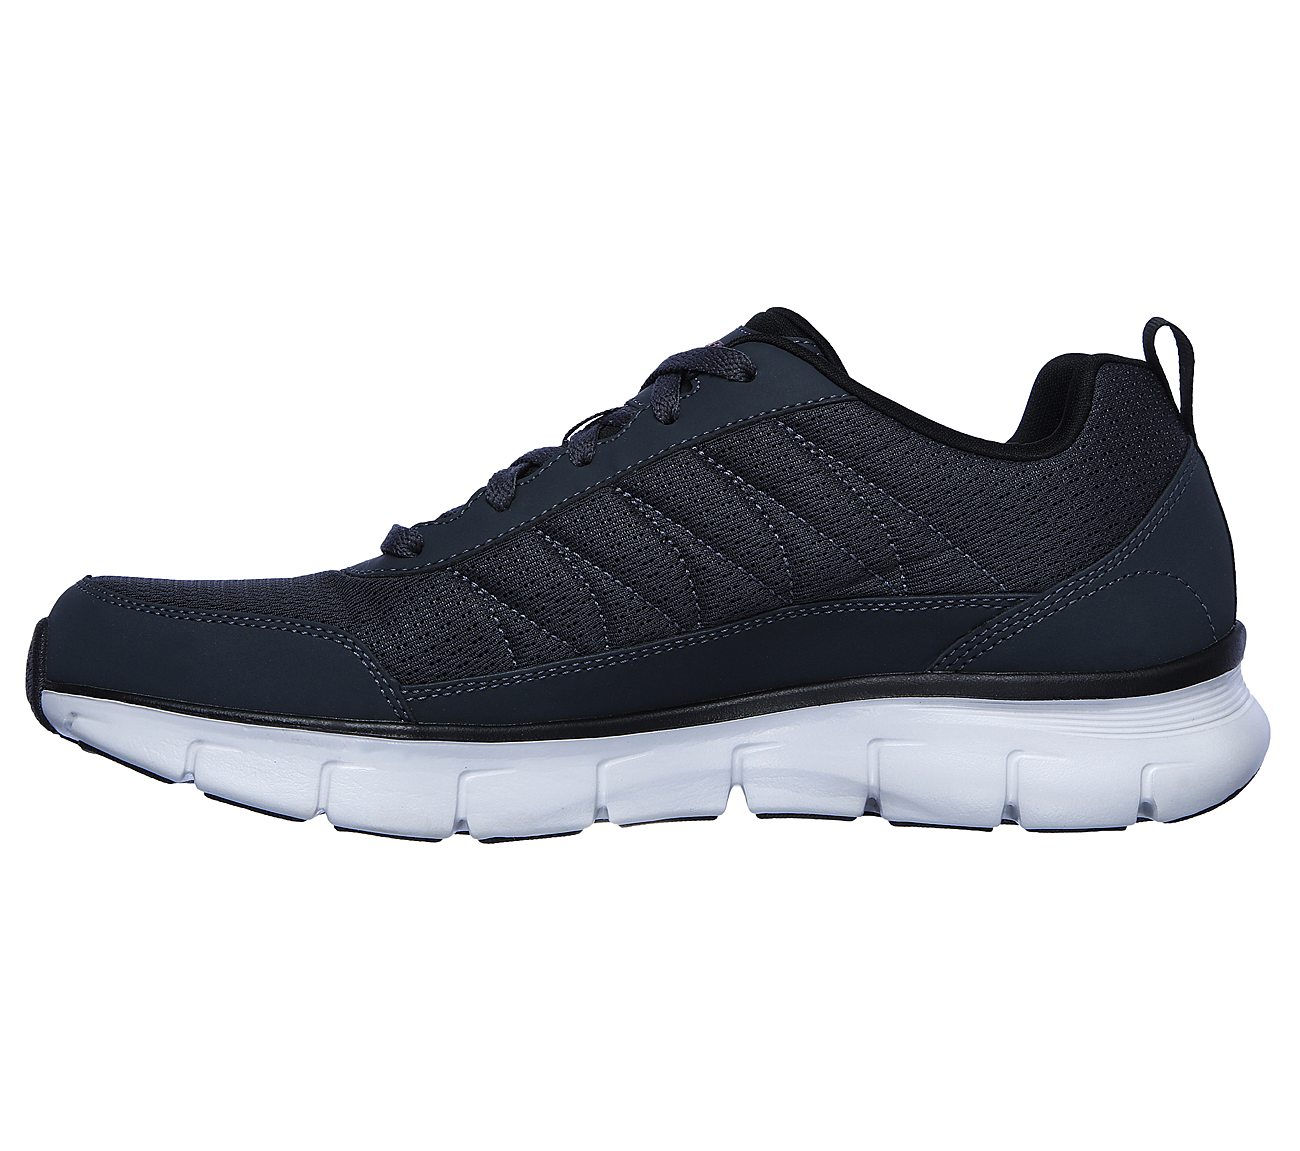 Buy SKECHERS Synergy 3.0 Sport Shoes